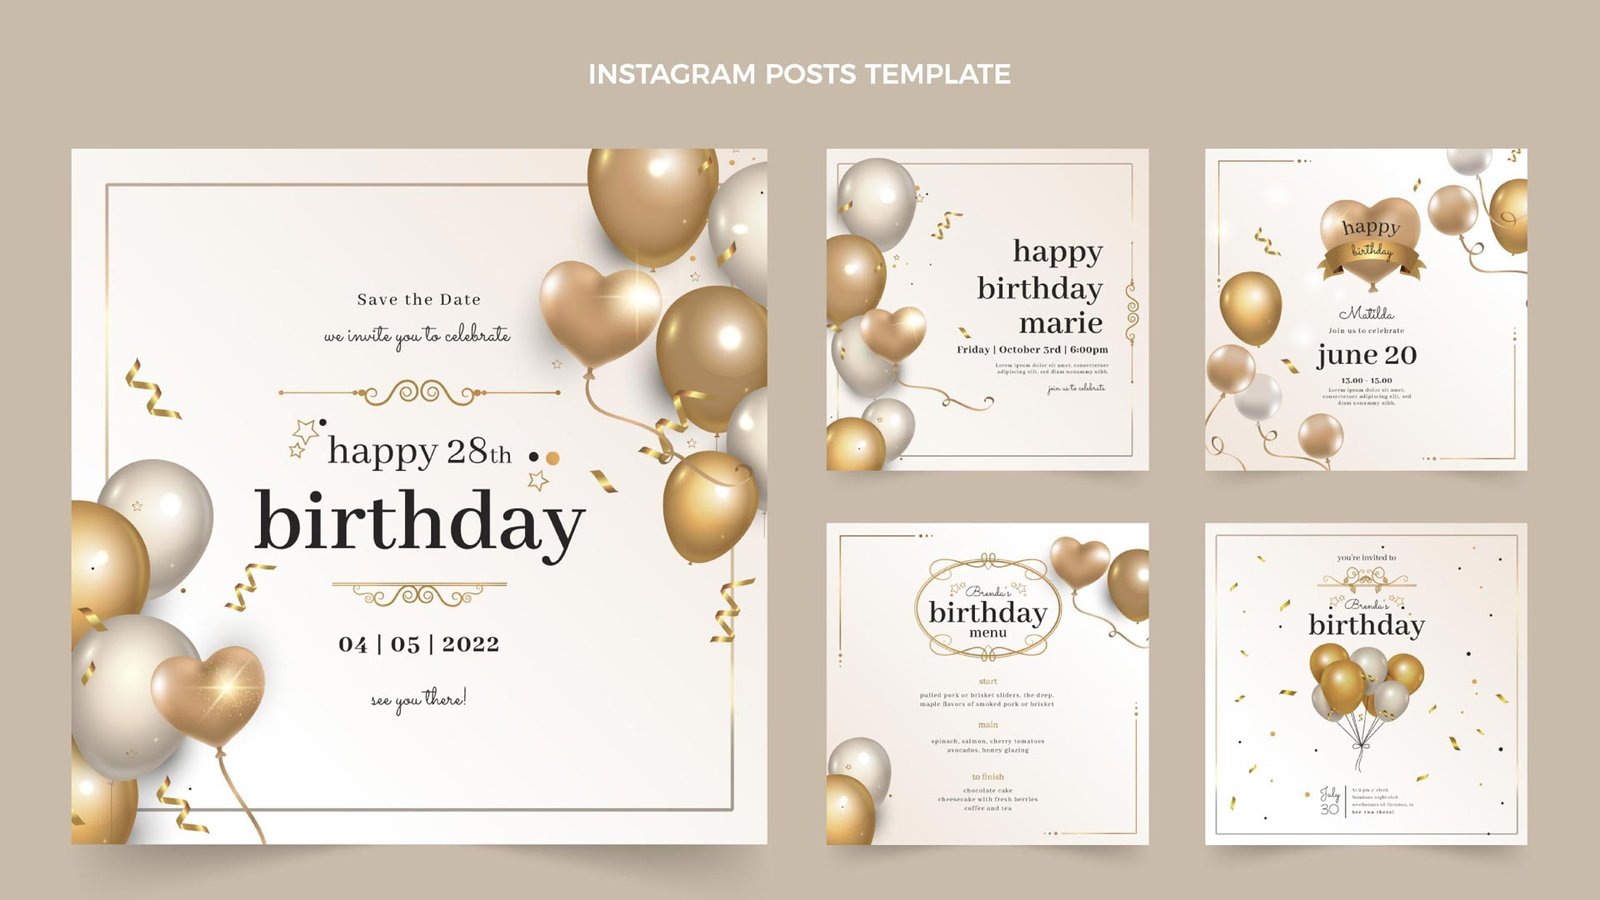 Things You Need To Know About the Online Birthday Card